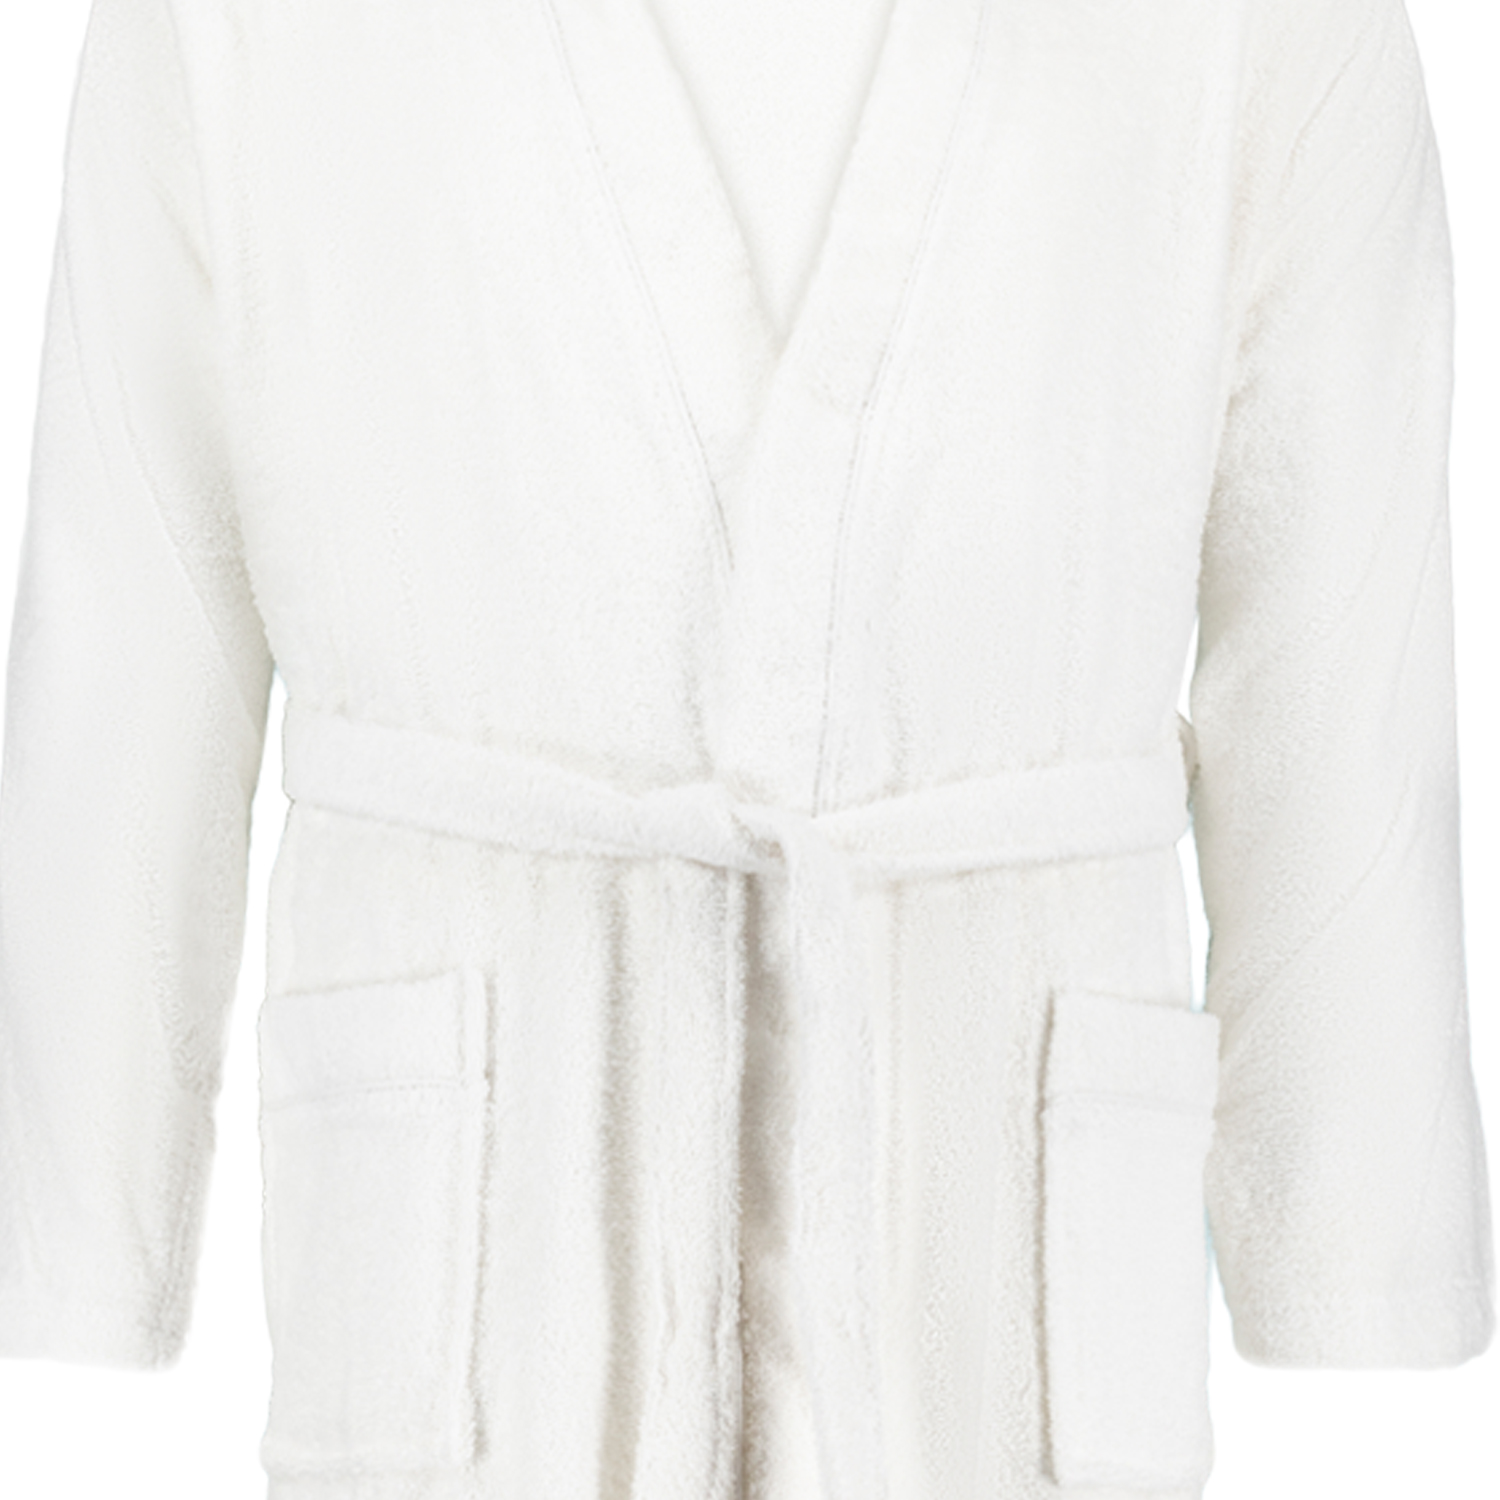 Bathrobe for men in white series JOEY by ADAMO up to oversize 12XL